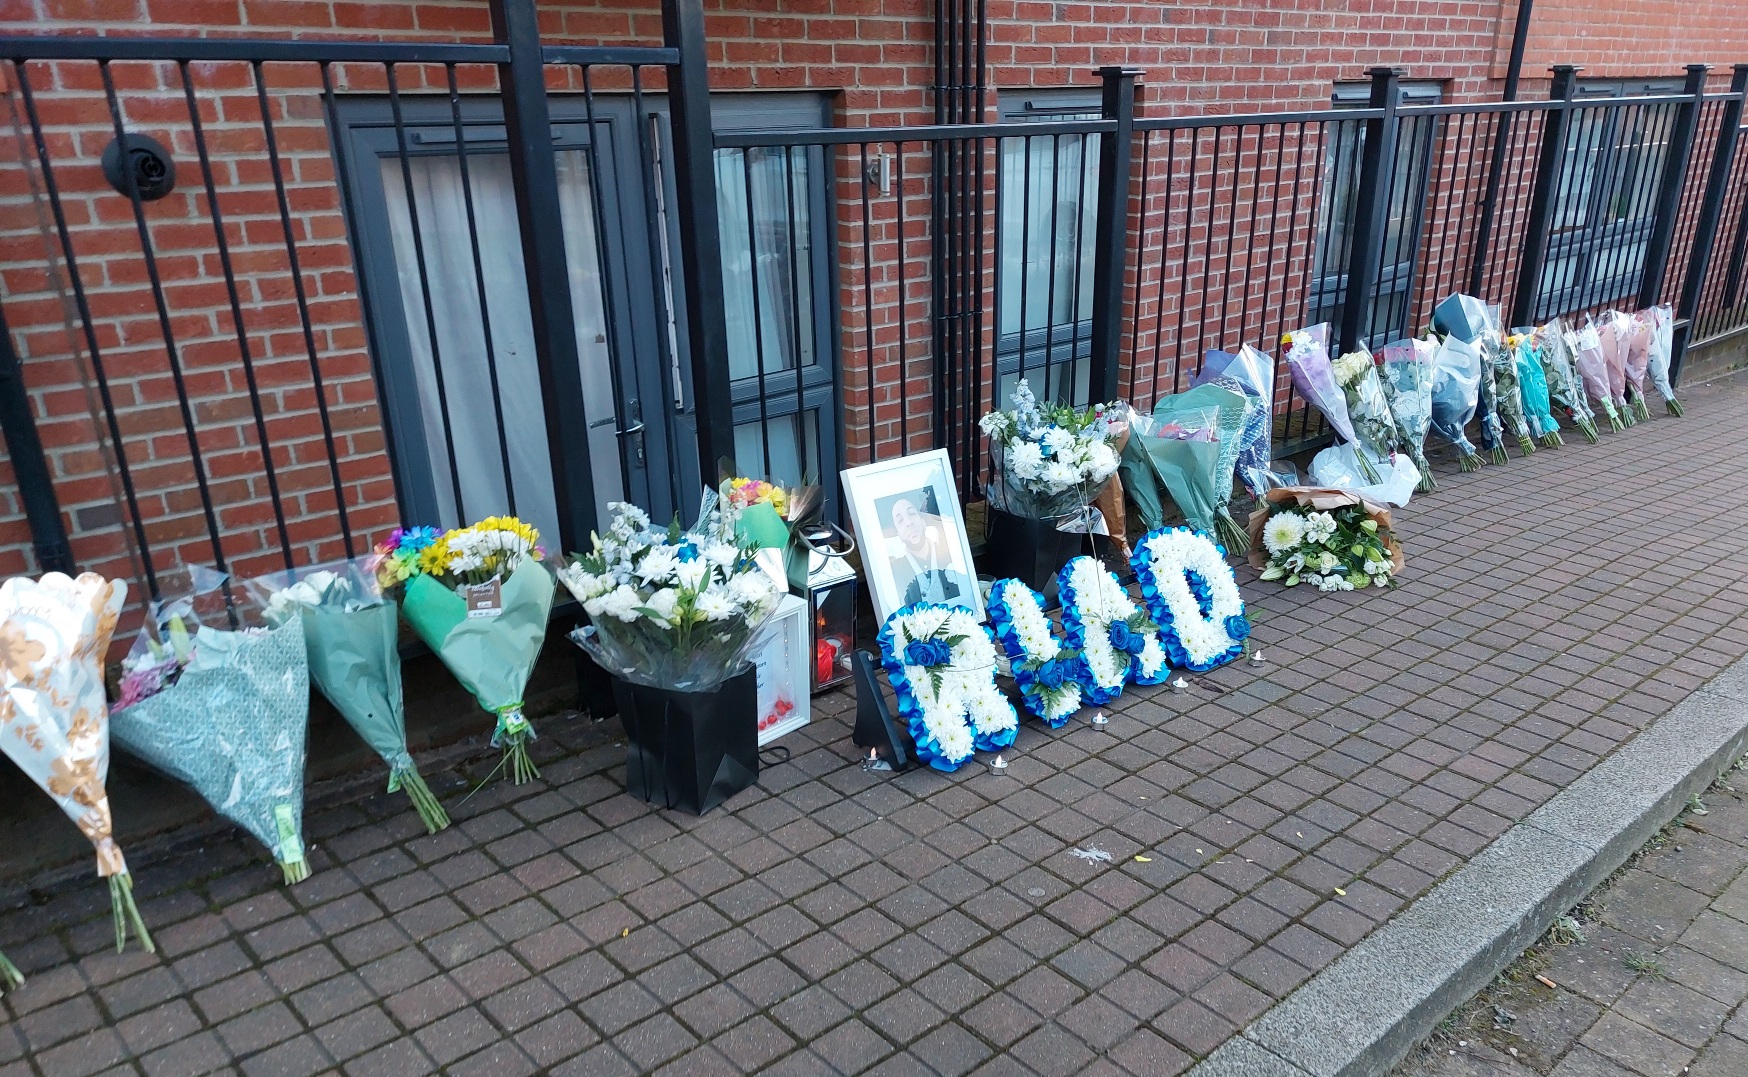 Family and friends laid Tributes where brother died in three storey fall in Watford